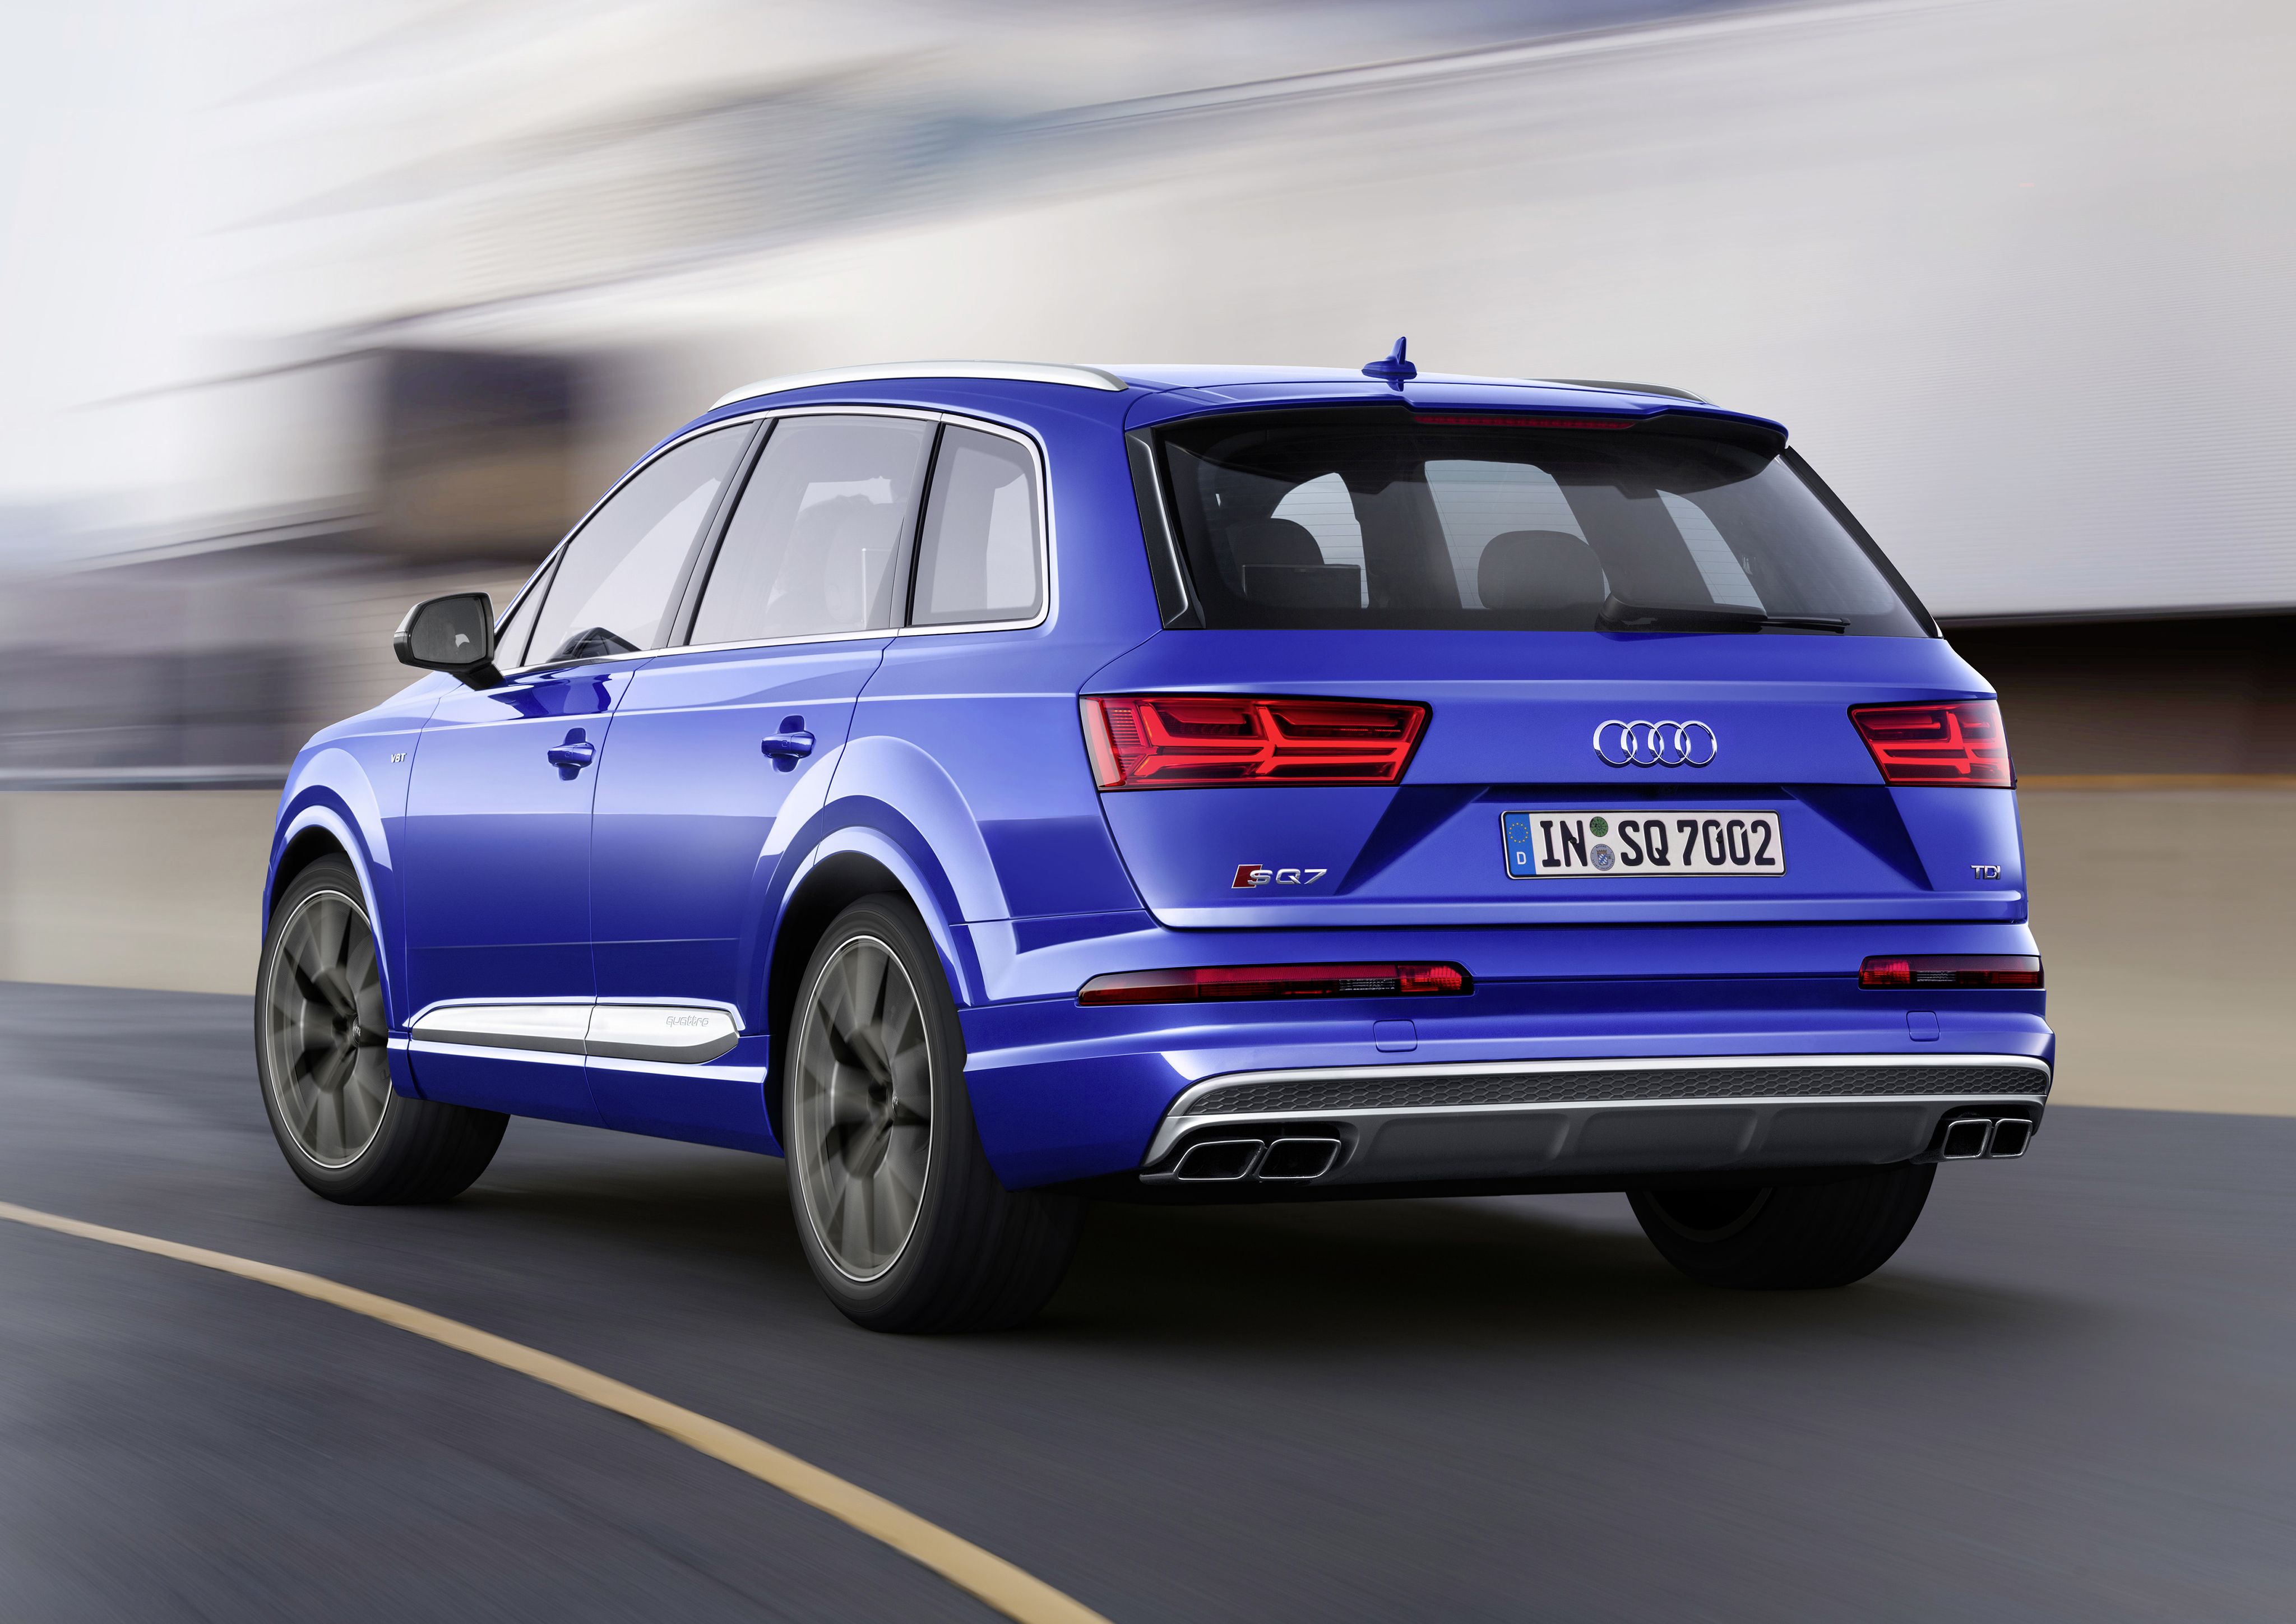 Audi SQ7 hd specifications